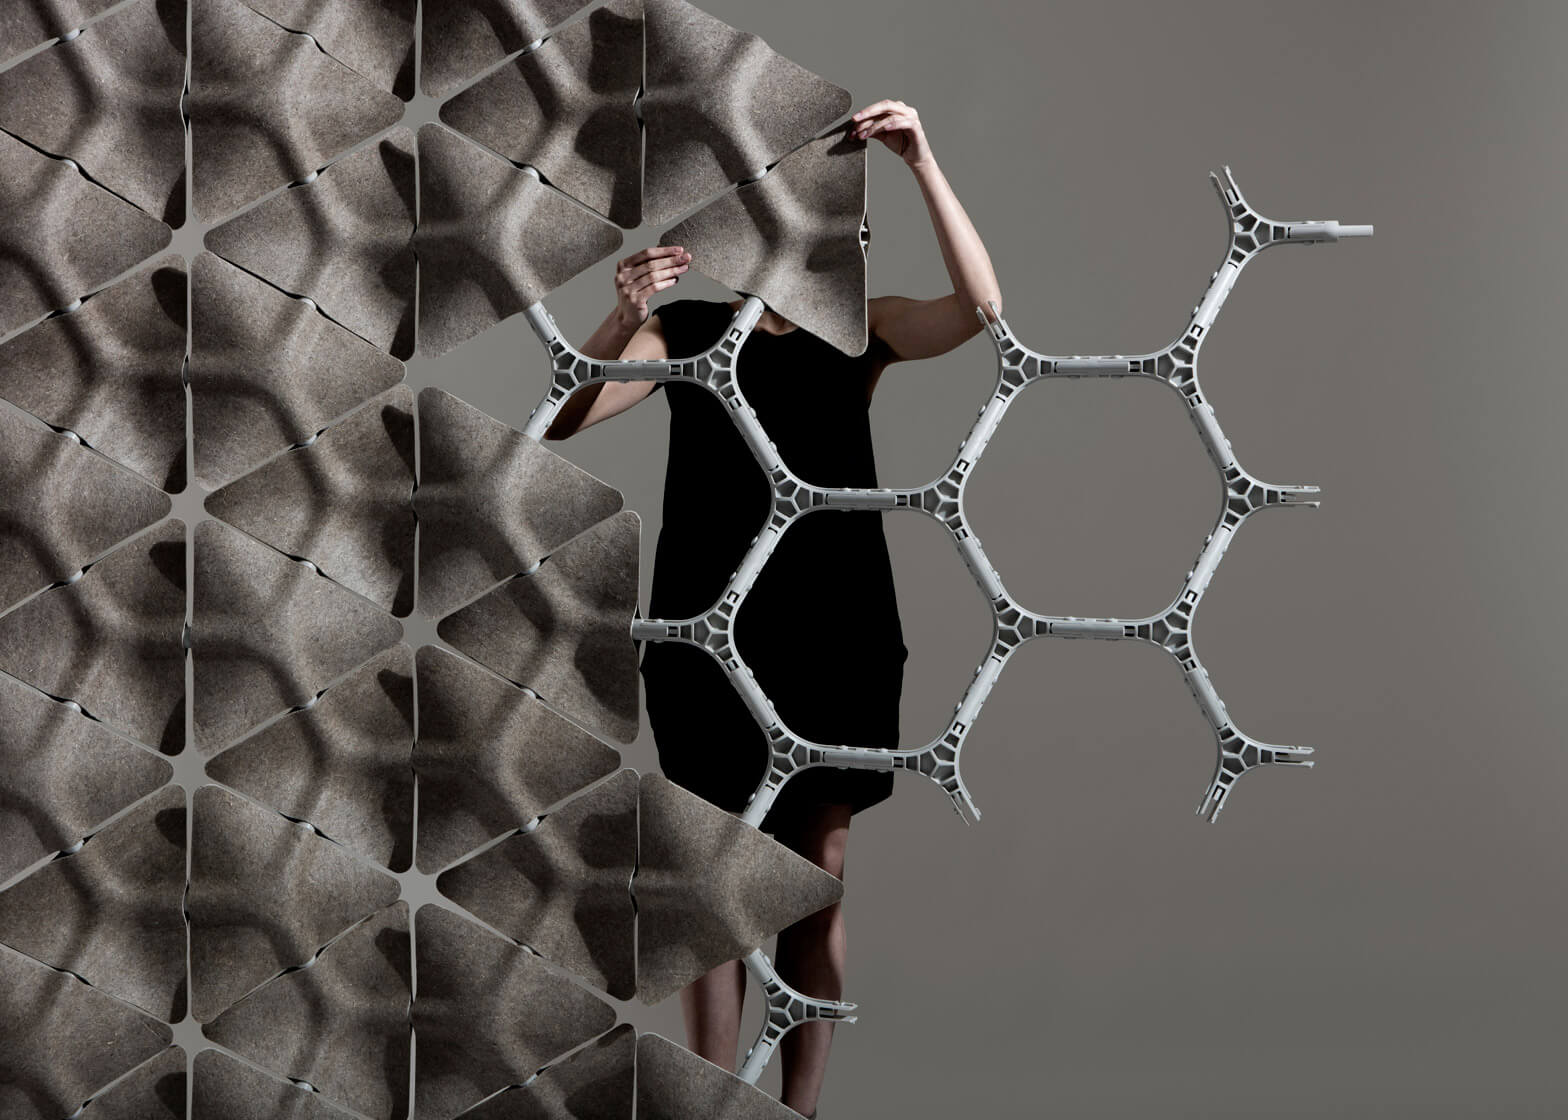 Scale, designerd by LAYER, is a modular acoustic system made of triangular hemp tiles